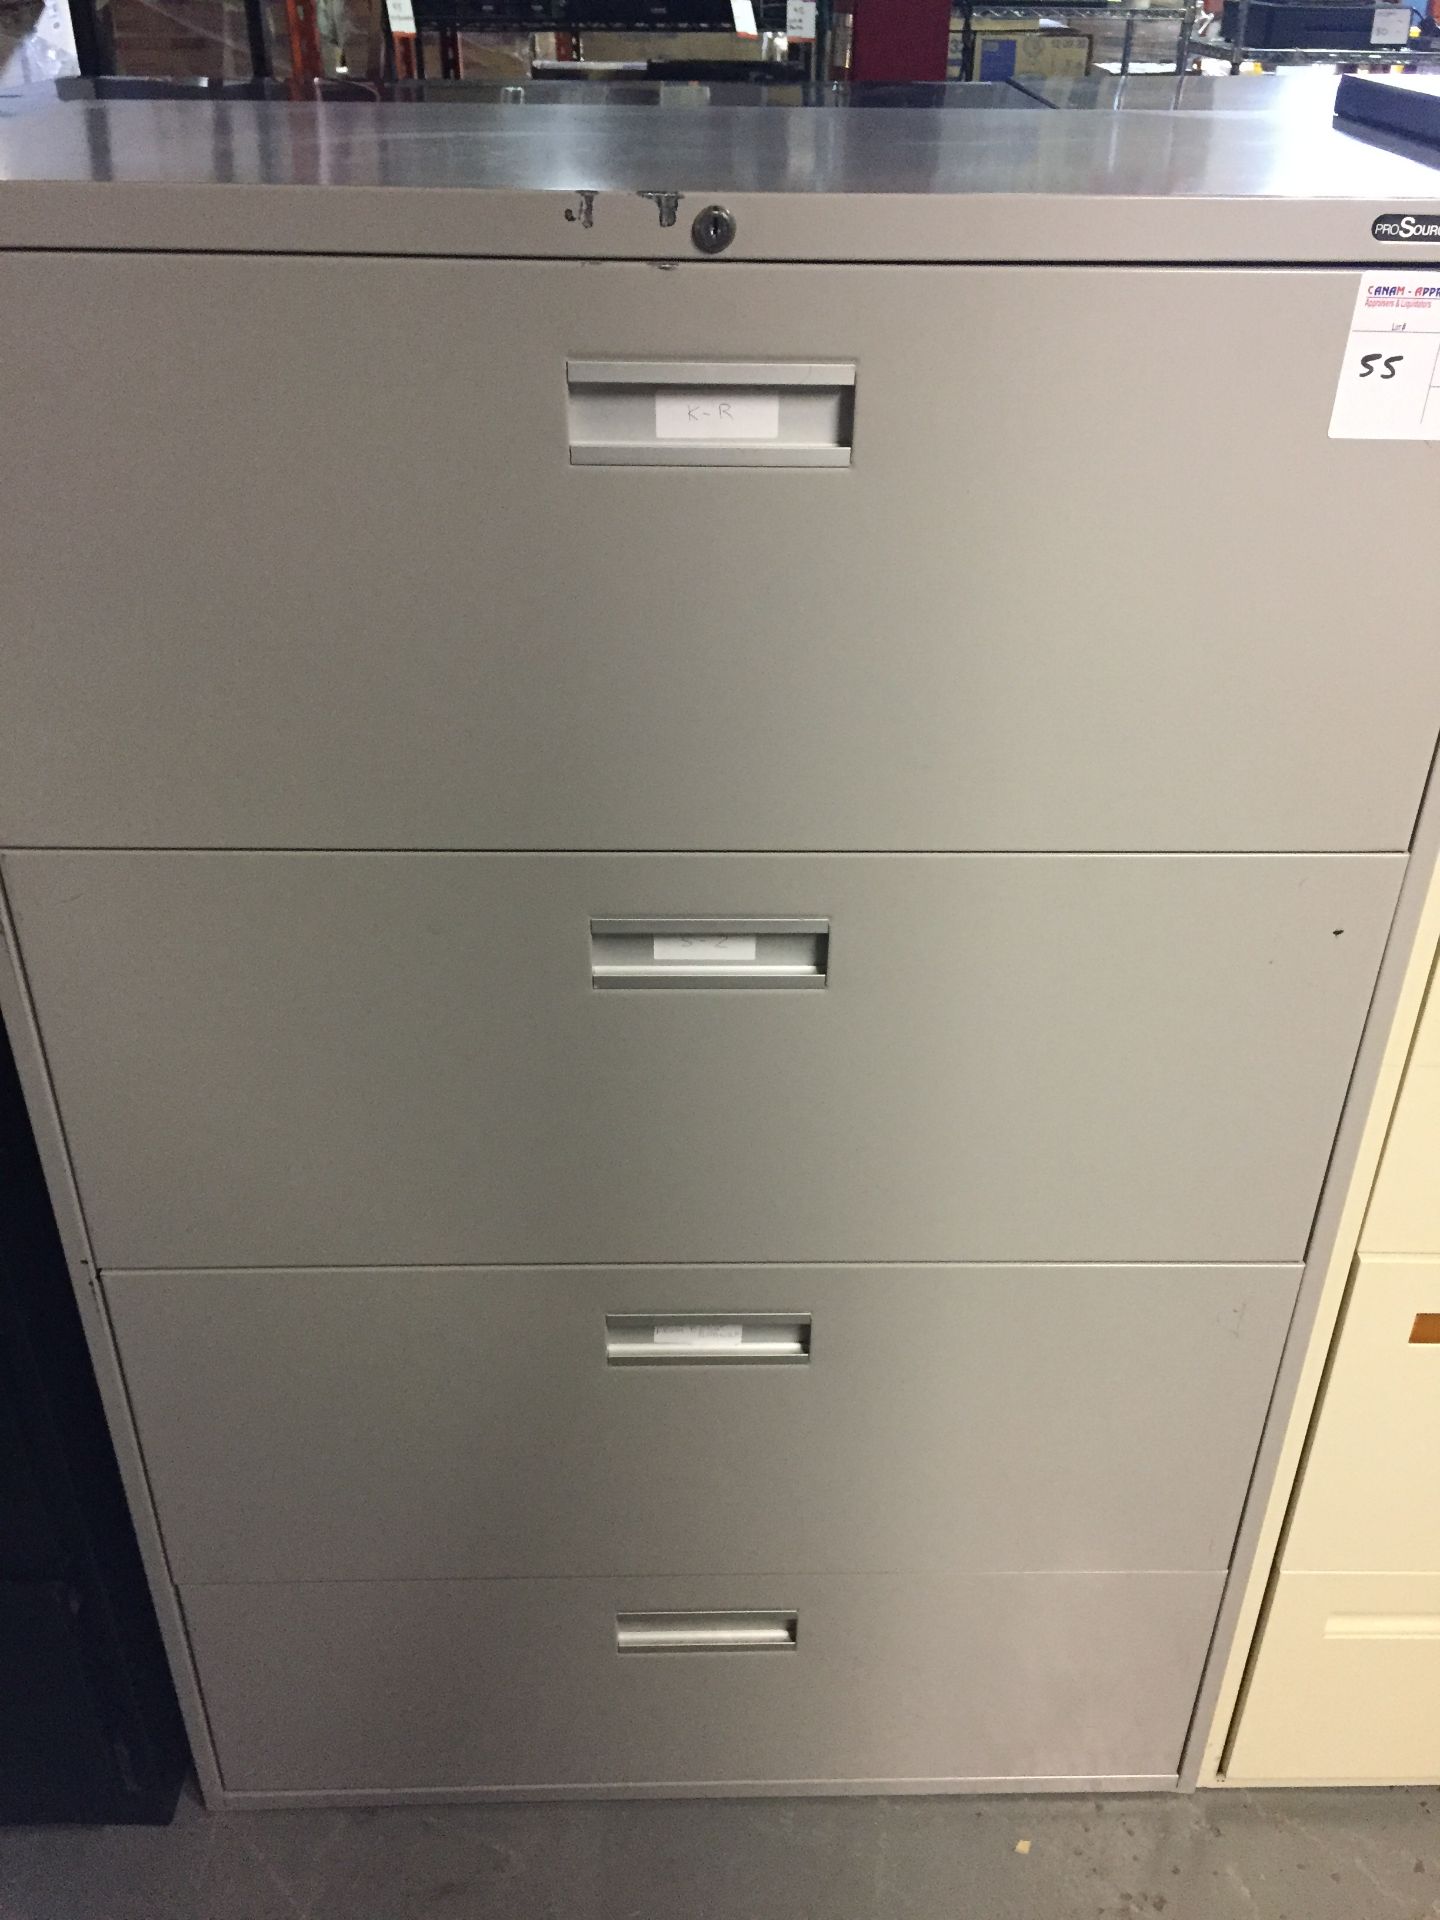 4 DRAWER WIDE FILING CABINET GREY - 1PC